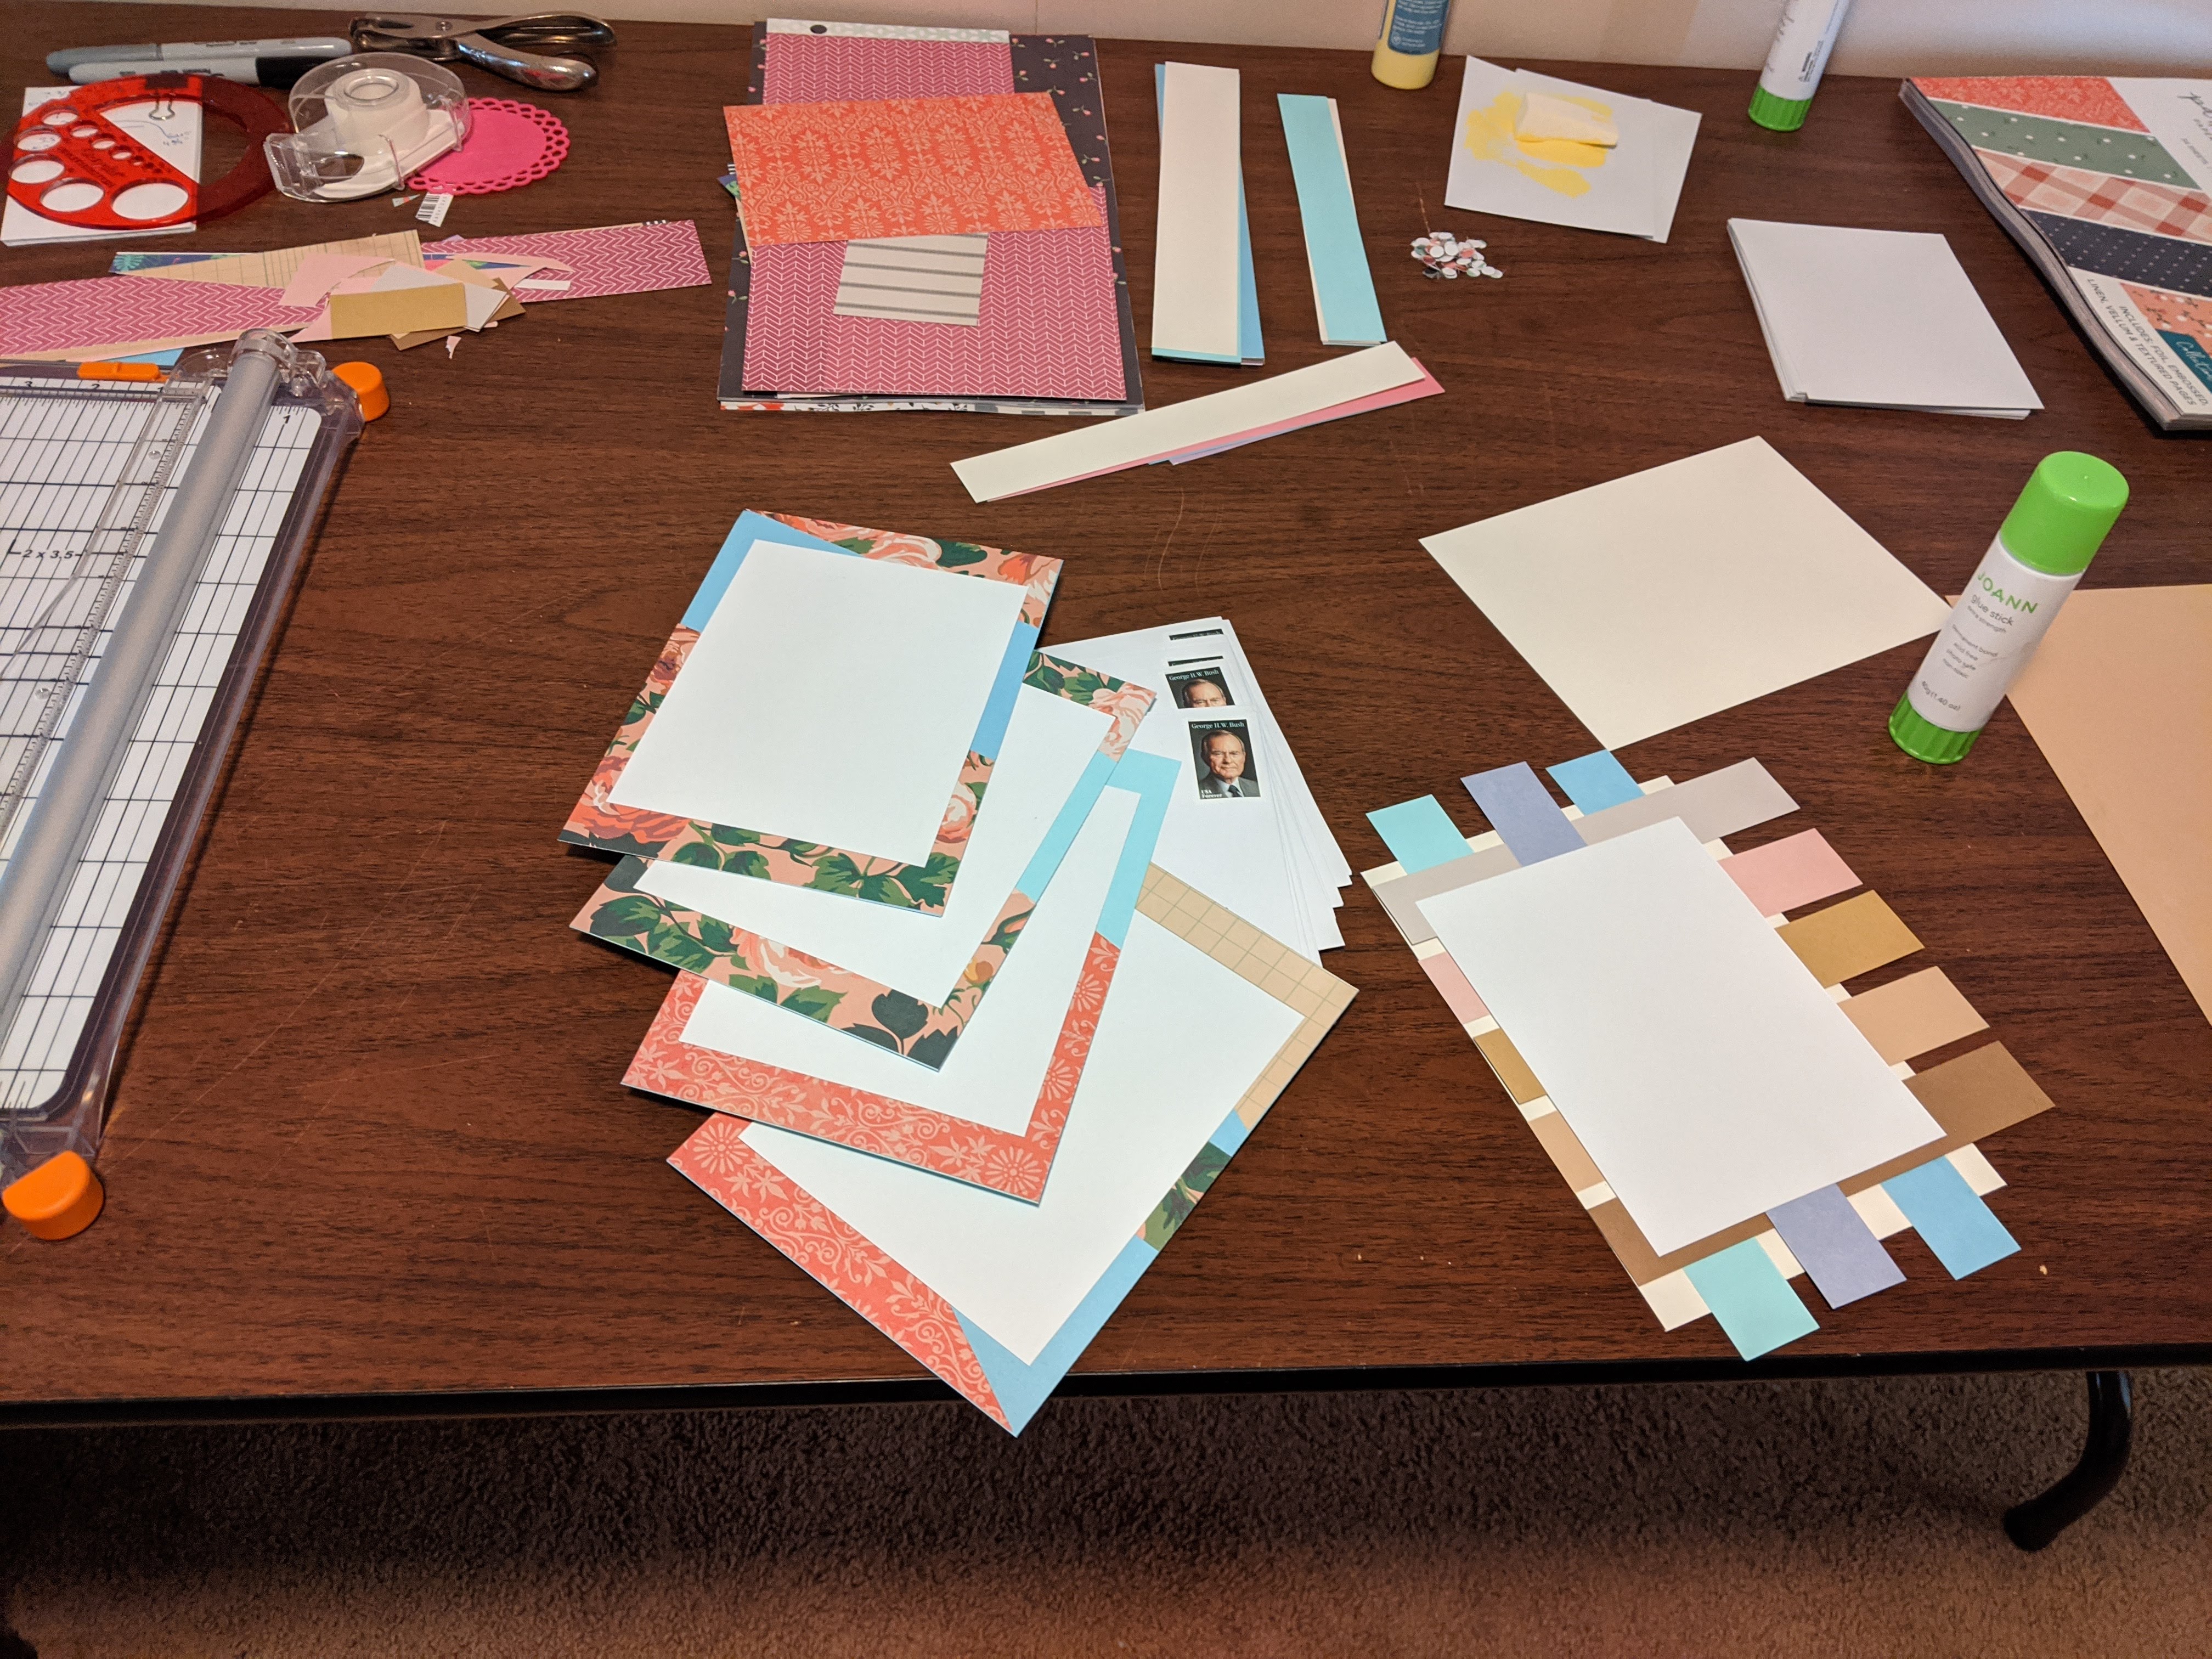 Papercrafts, the beginnings of wedding invitations, on a table